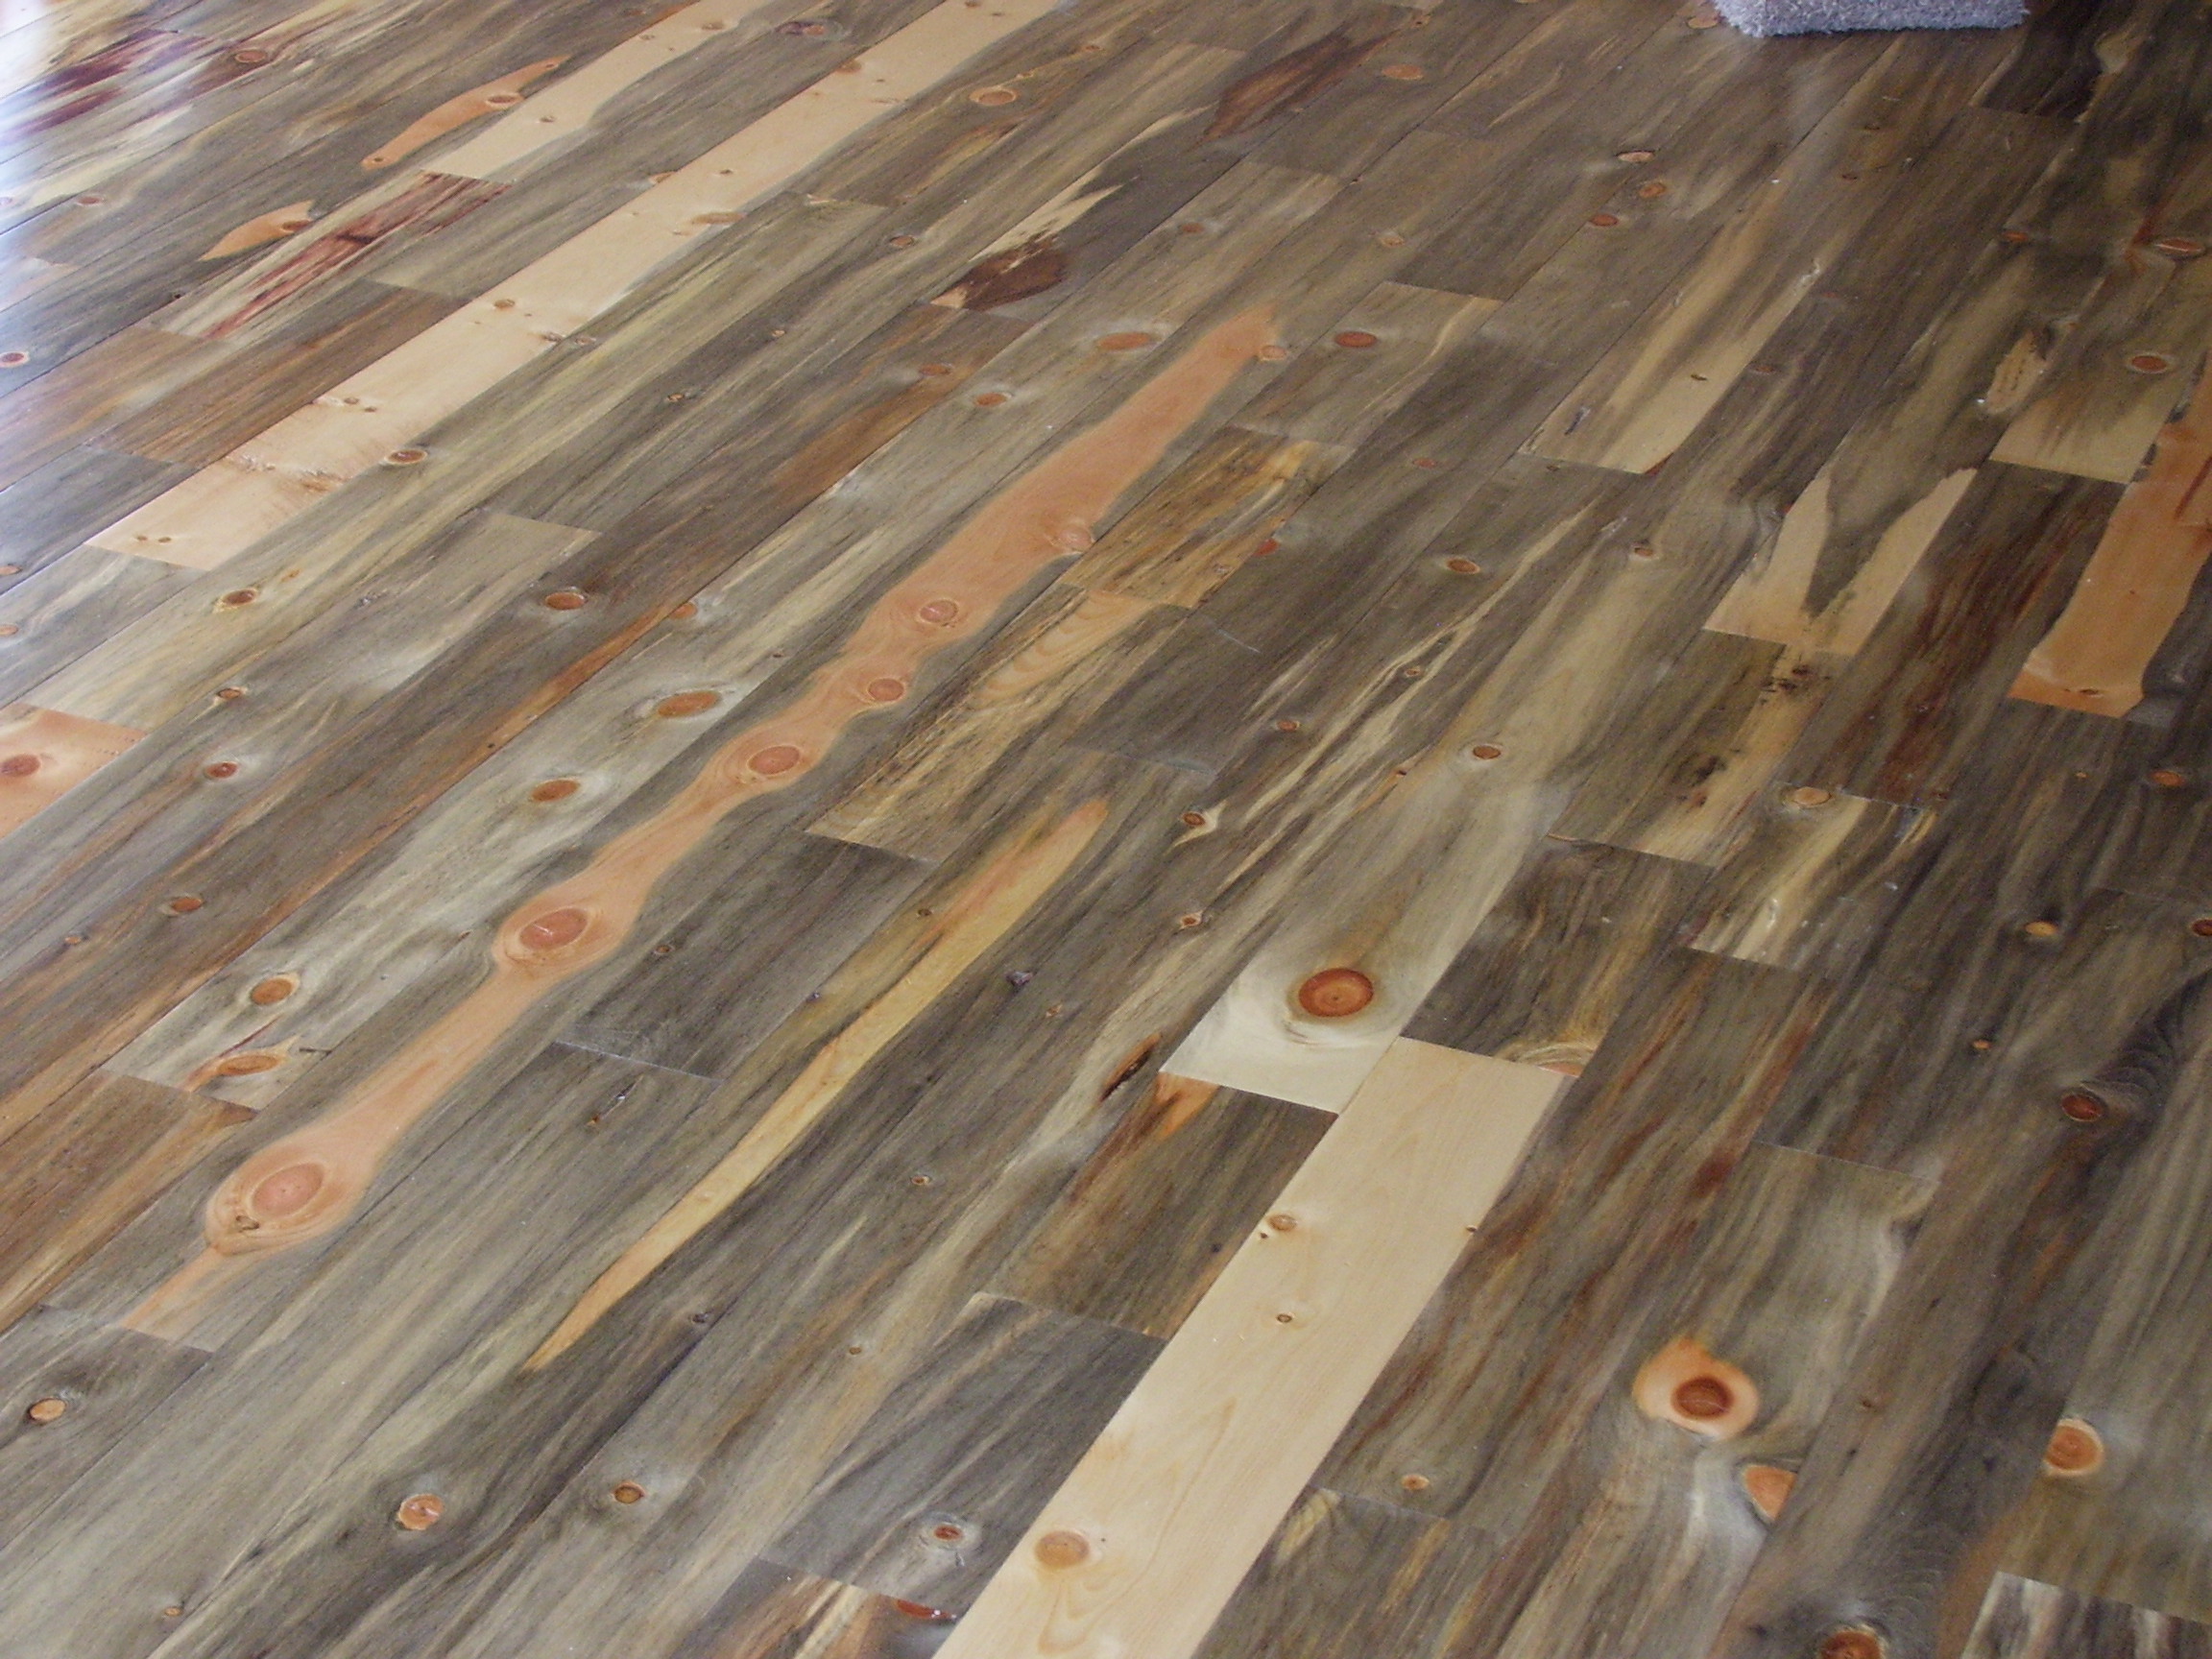 What Is Blue Beetle Kill Pine And Why Choose It For Your Hardwood Floor Installation